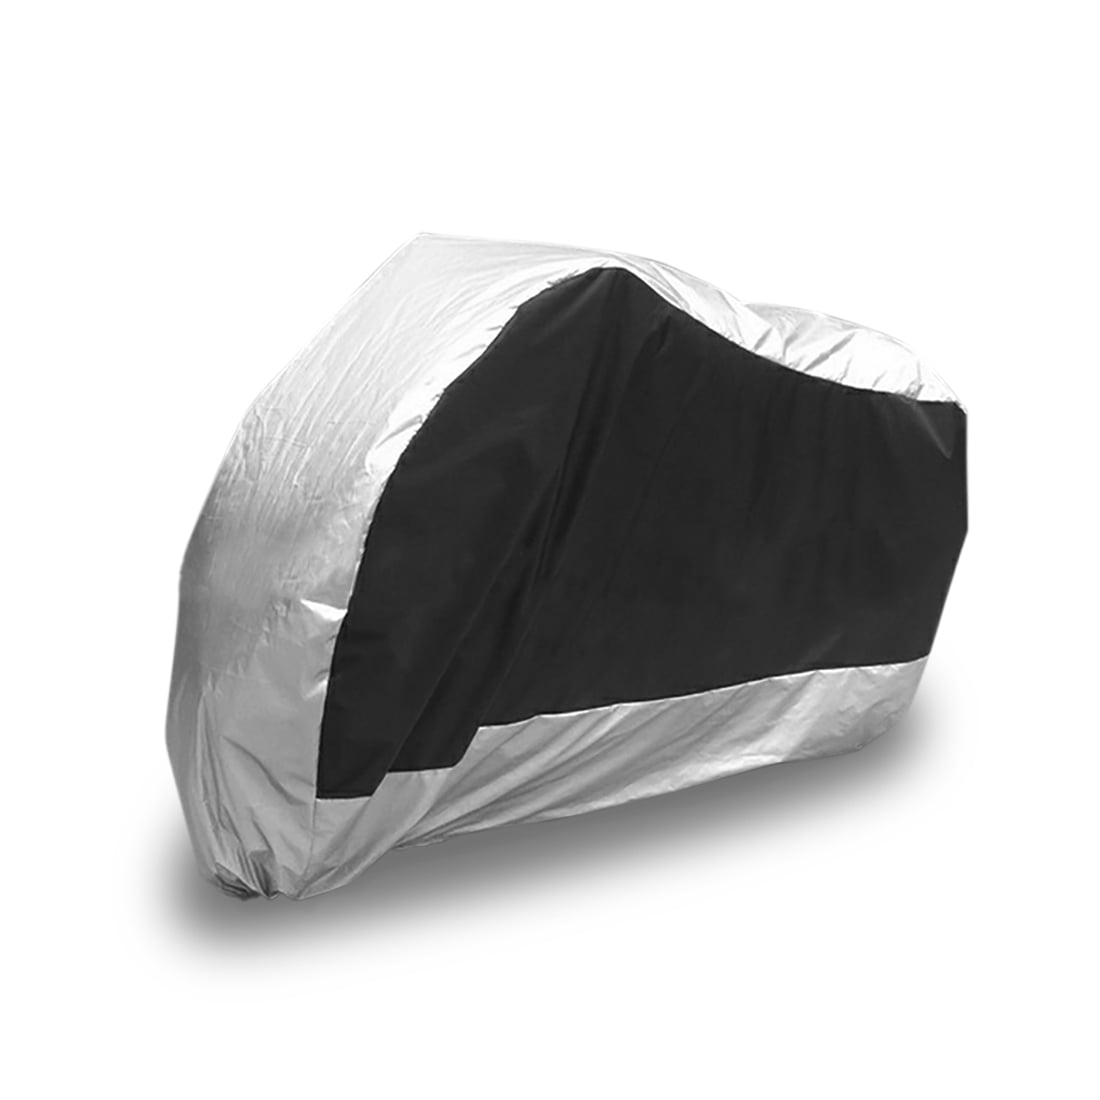 Motorcycle Indoor Motorbike Extra Large Breathable Bike Dust Cover 246x104x127cm